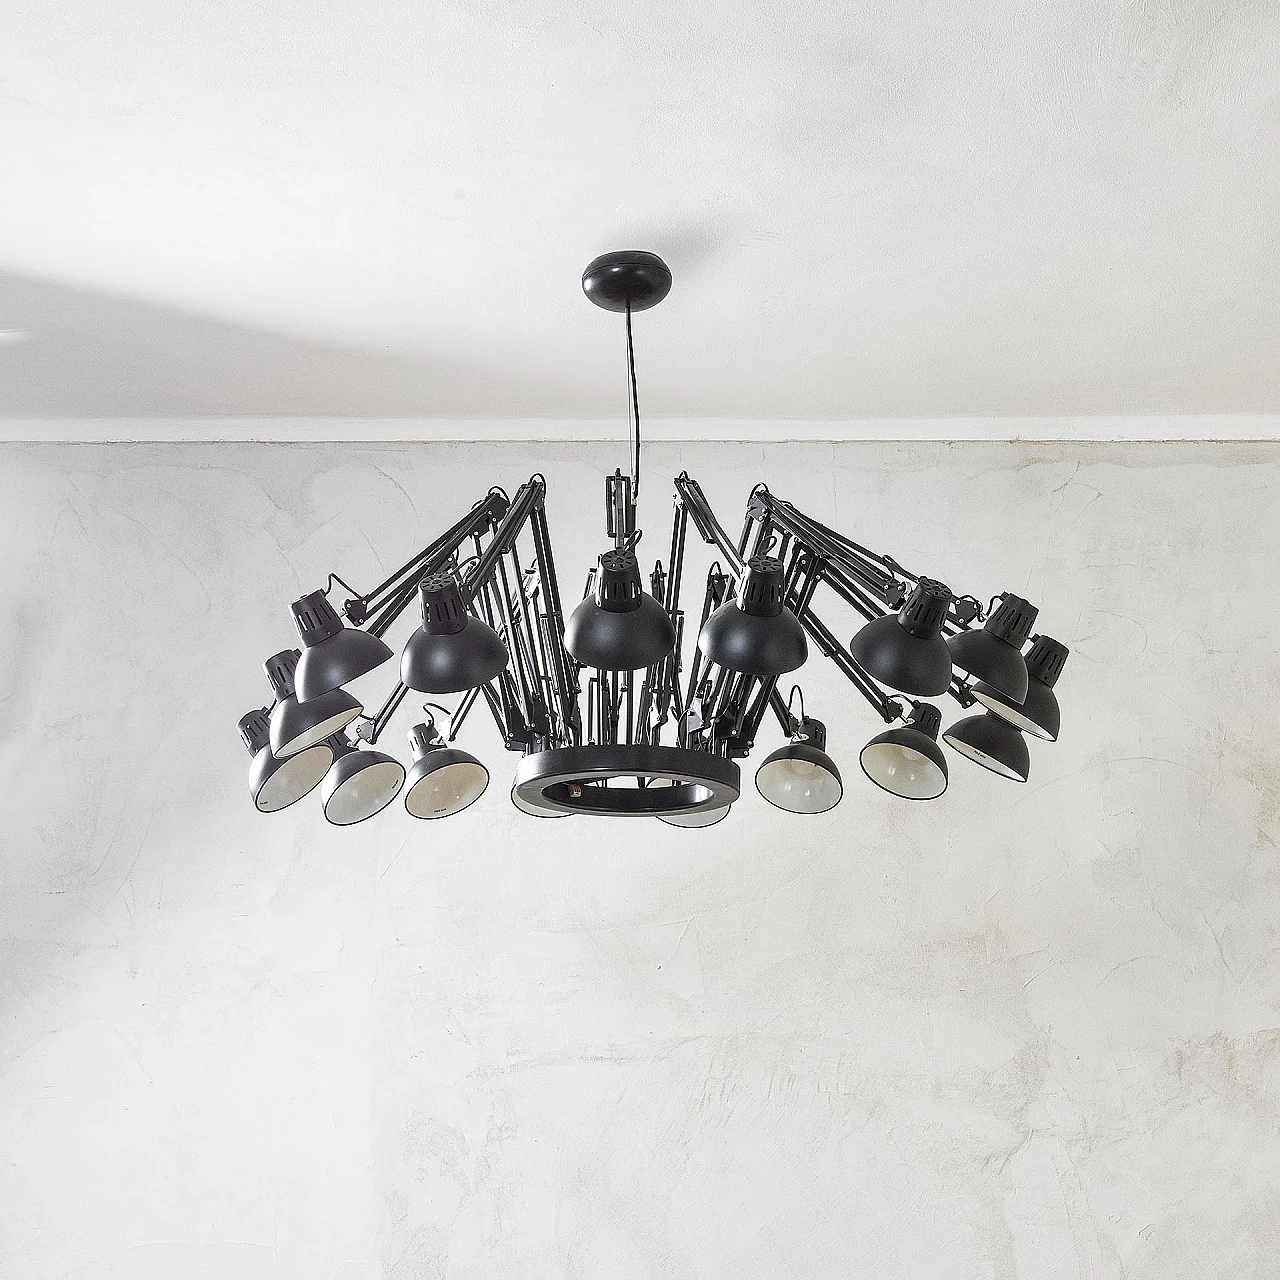 Dear Ingo chandelier by Ron Gilad for Moooi with 16 directional arms 5